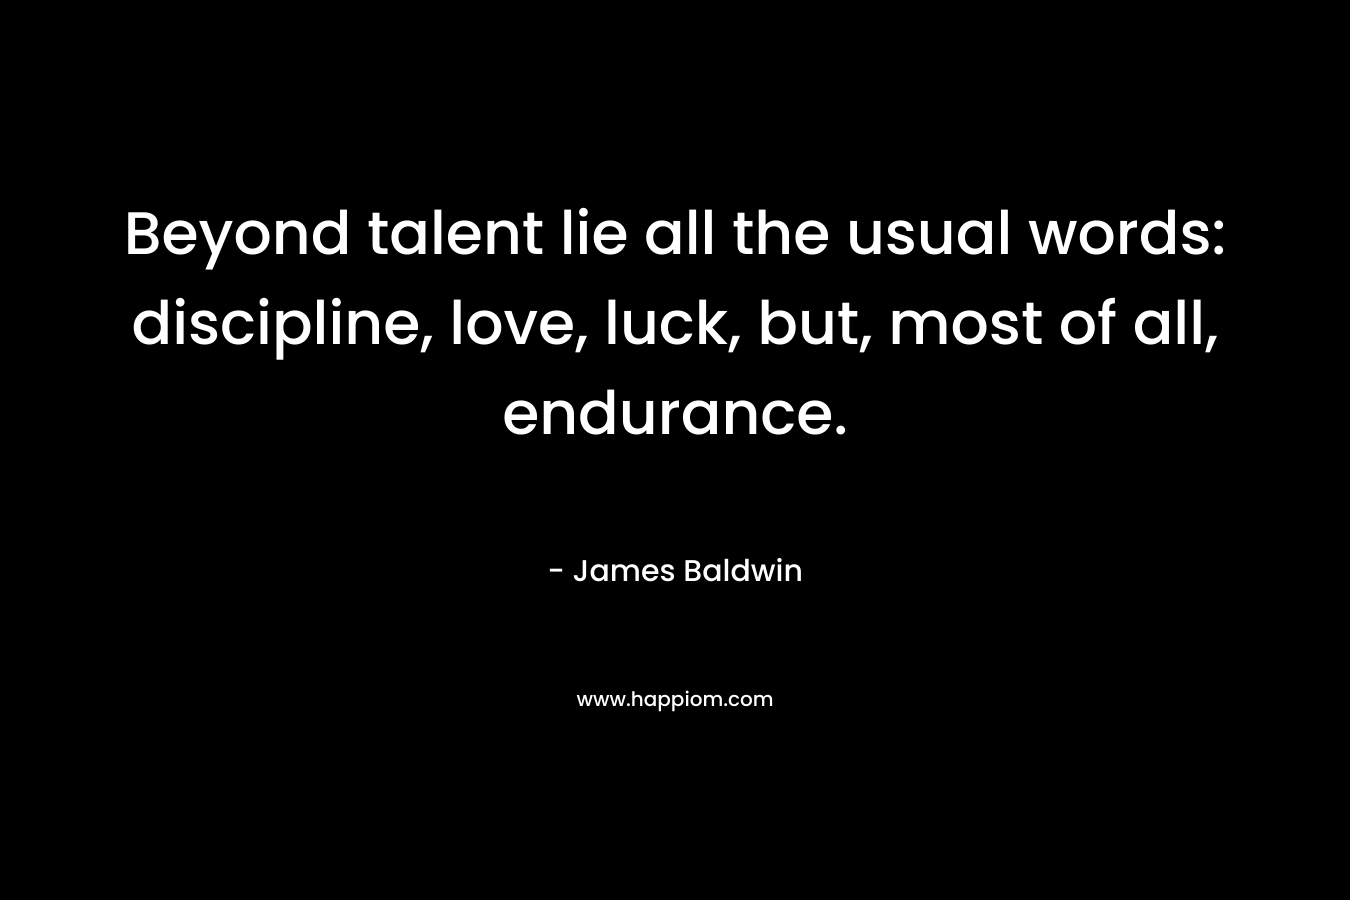 Beyond talent lie all the usual words: discipline, love, luck, but, most of all, endurance.